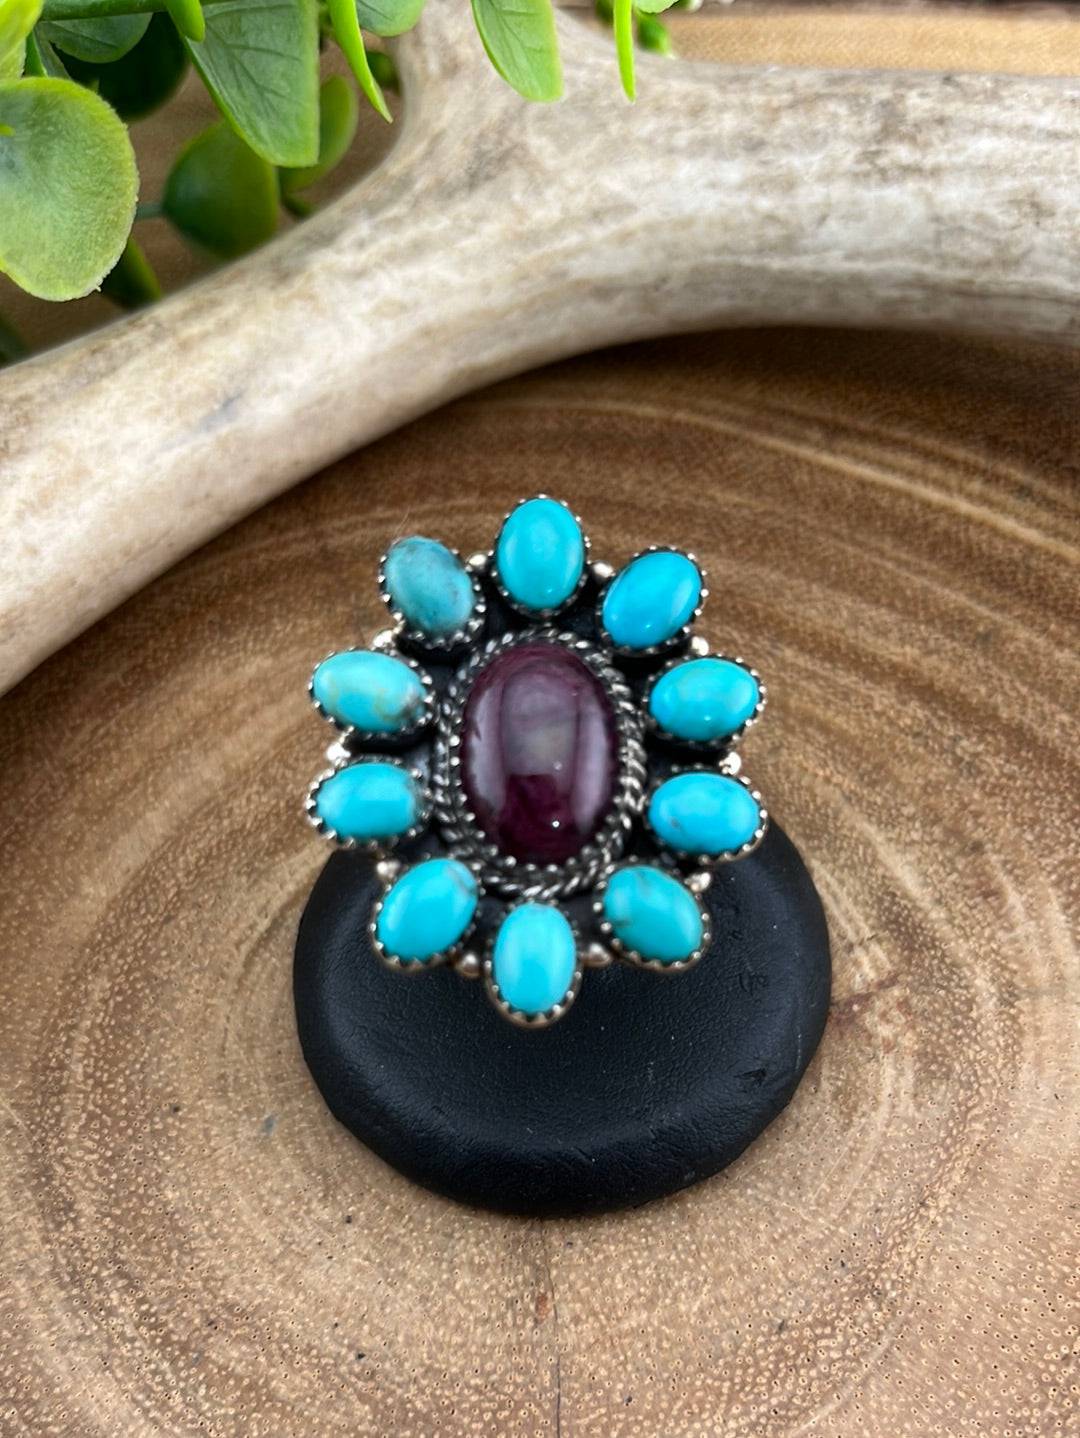 Kipling Purple Spiny Oval With Turquoise Surround Sterling Ring - Adjustable